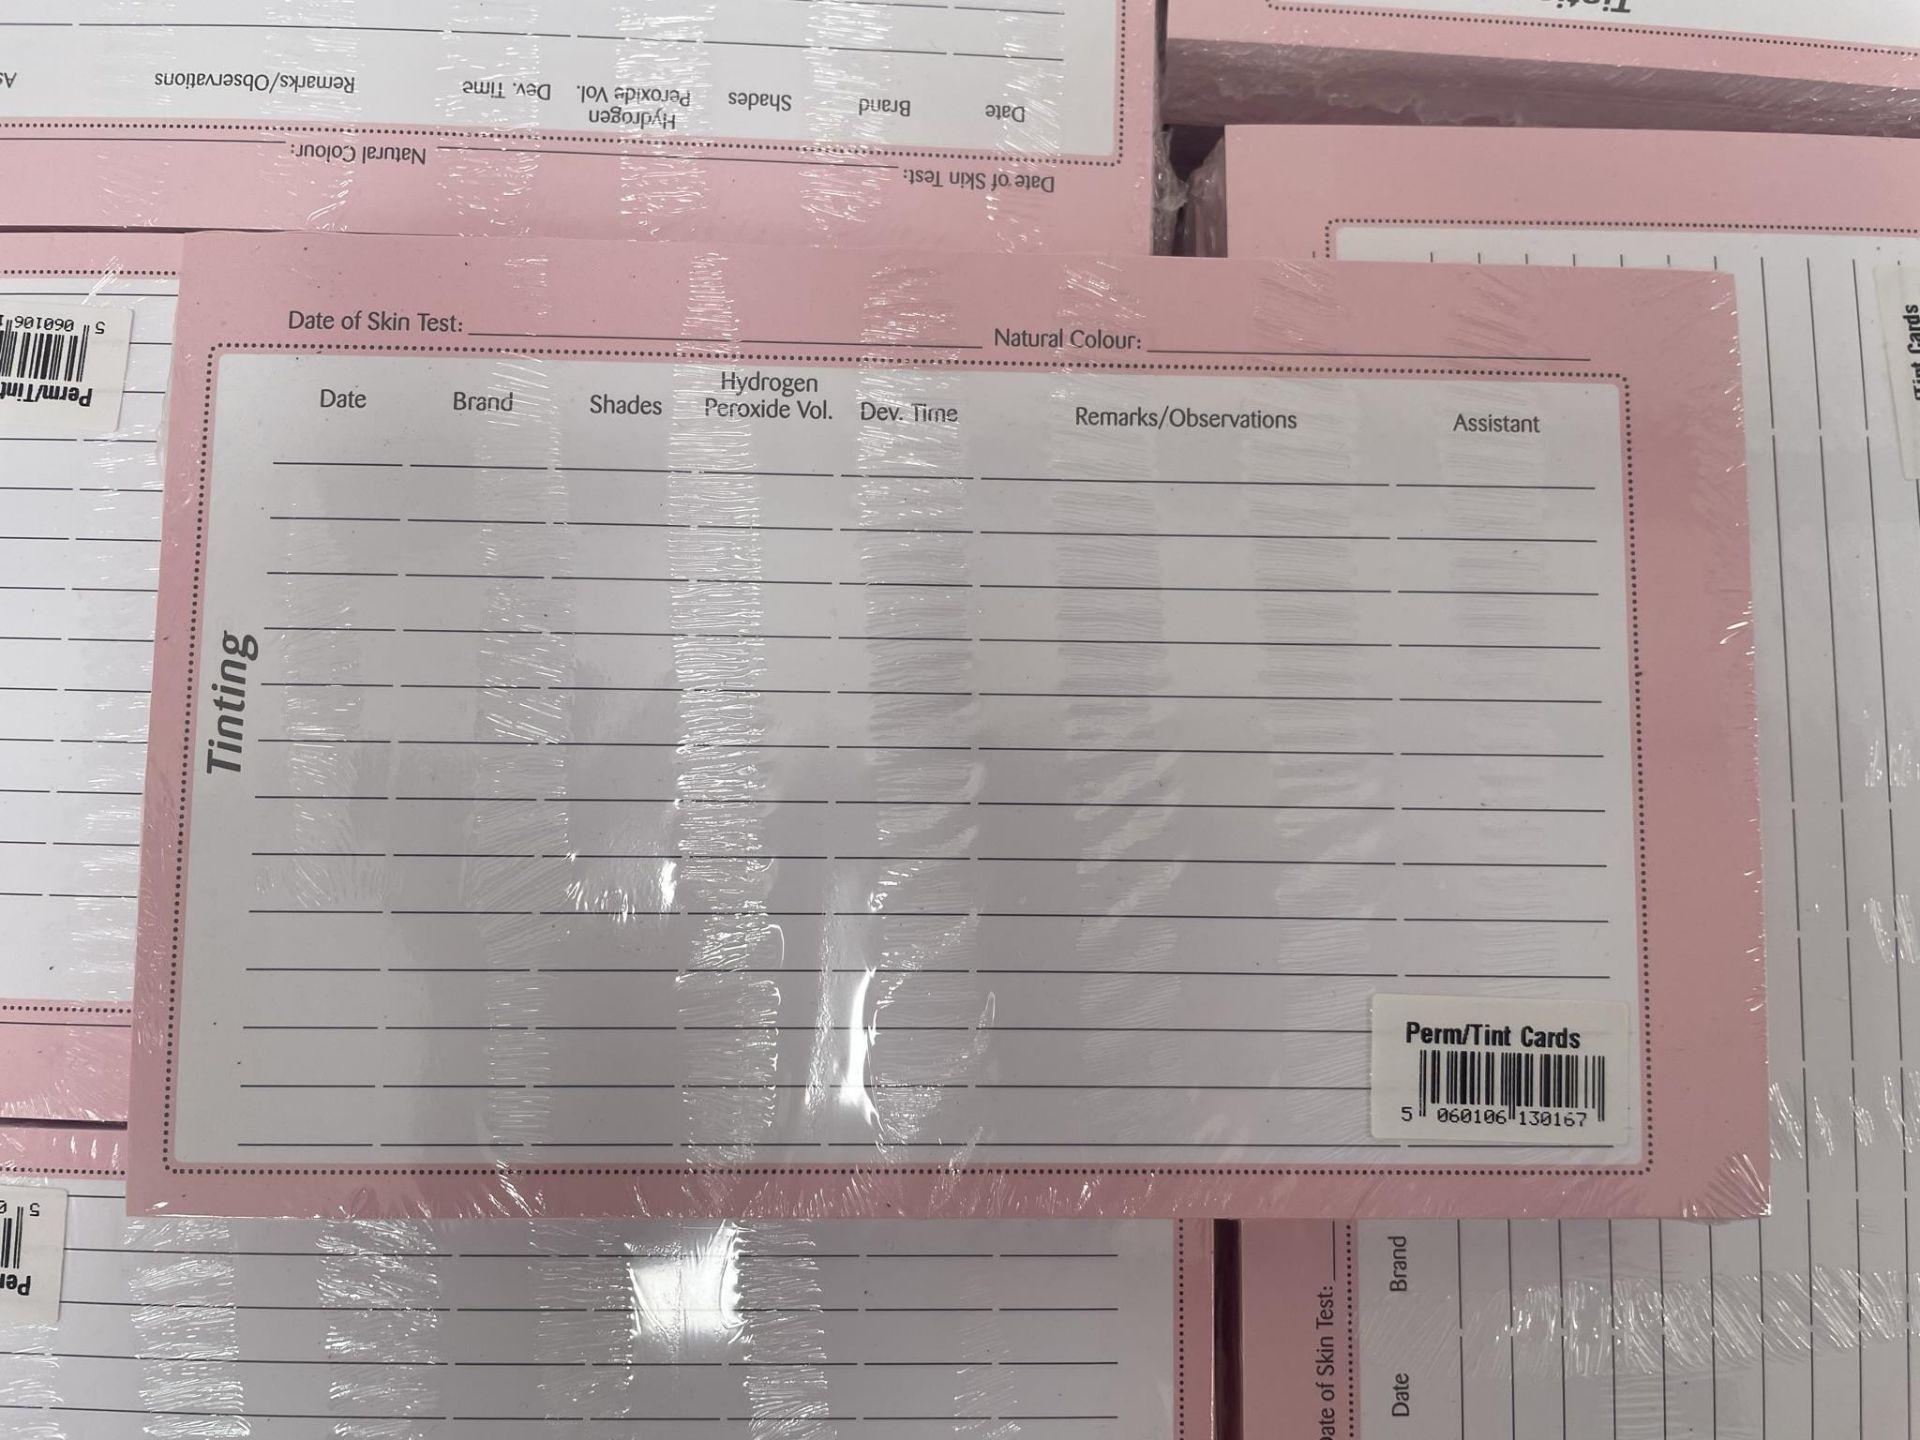 Approximately 1,000 x Packs of Quirepale Perm/Tint Customer Record Cards